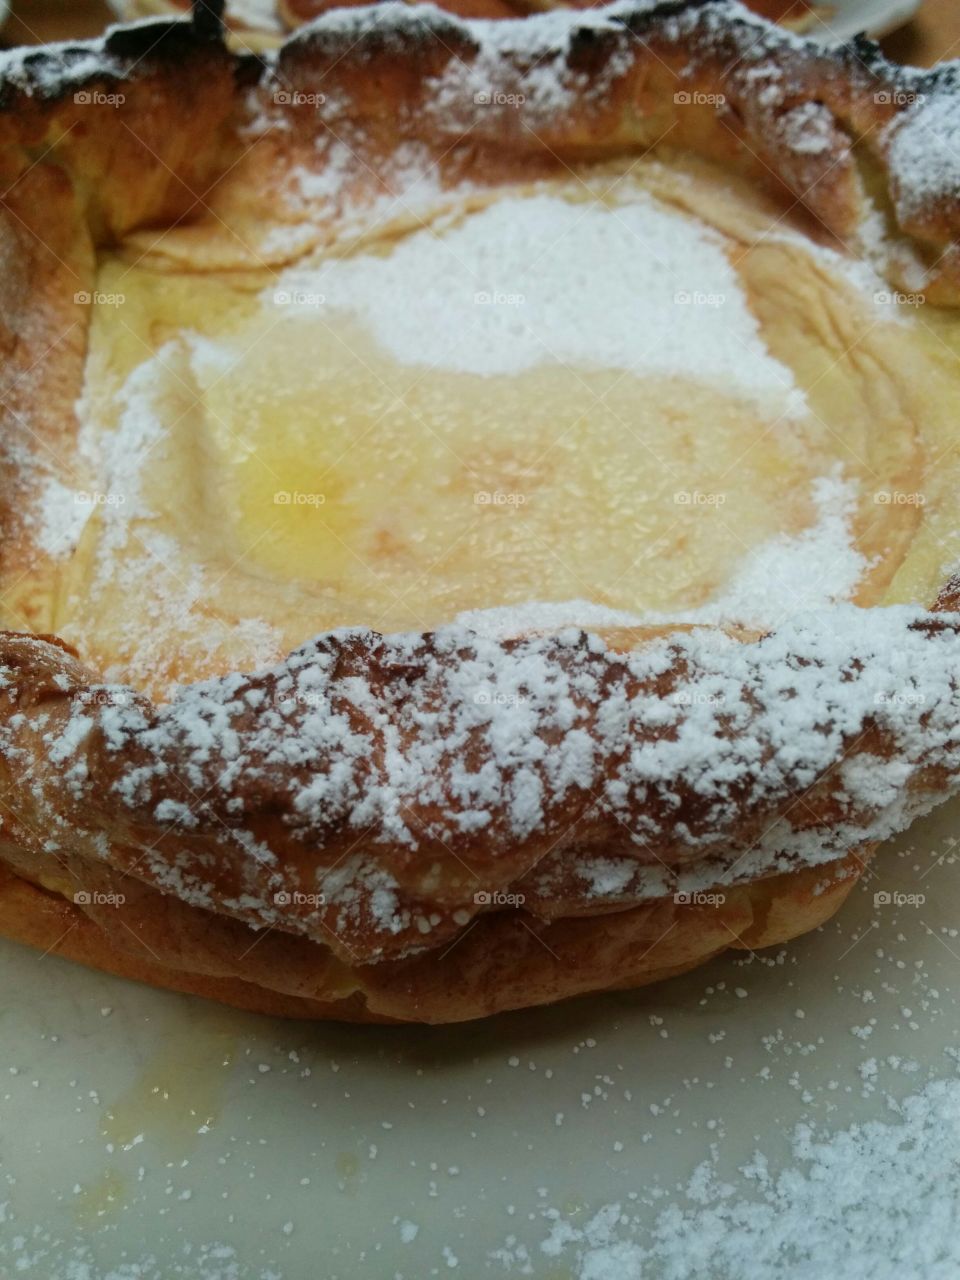 Dutch Baby breakfast. A pancake house specialty that's a bit insane and yummy.